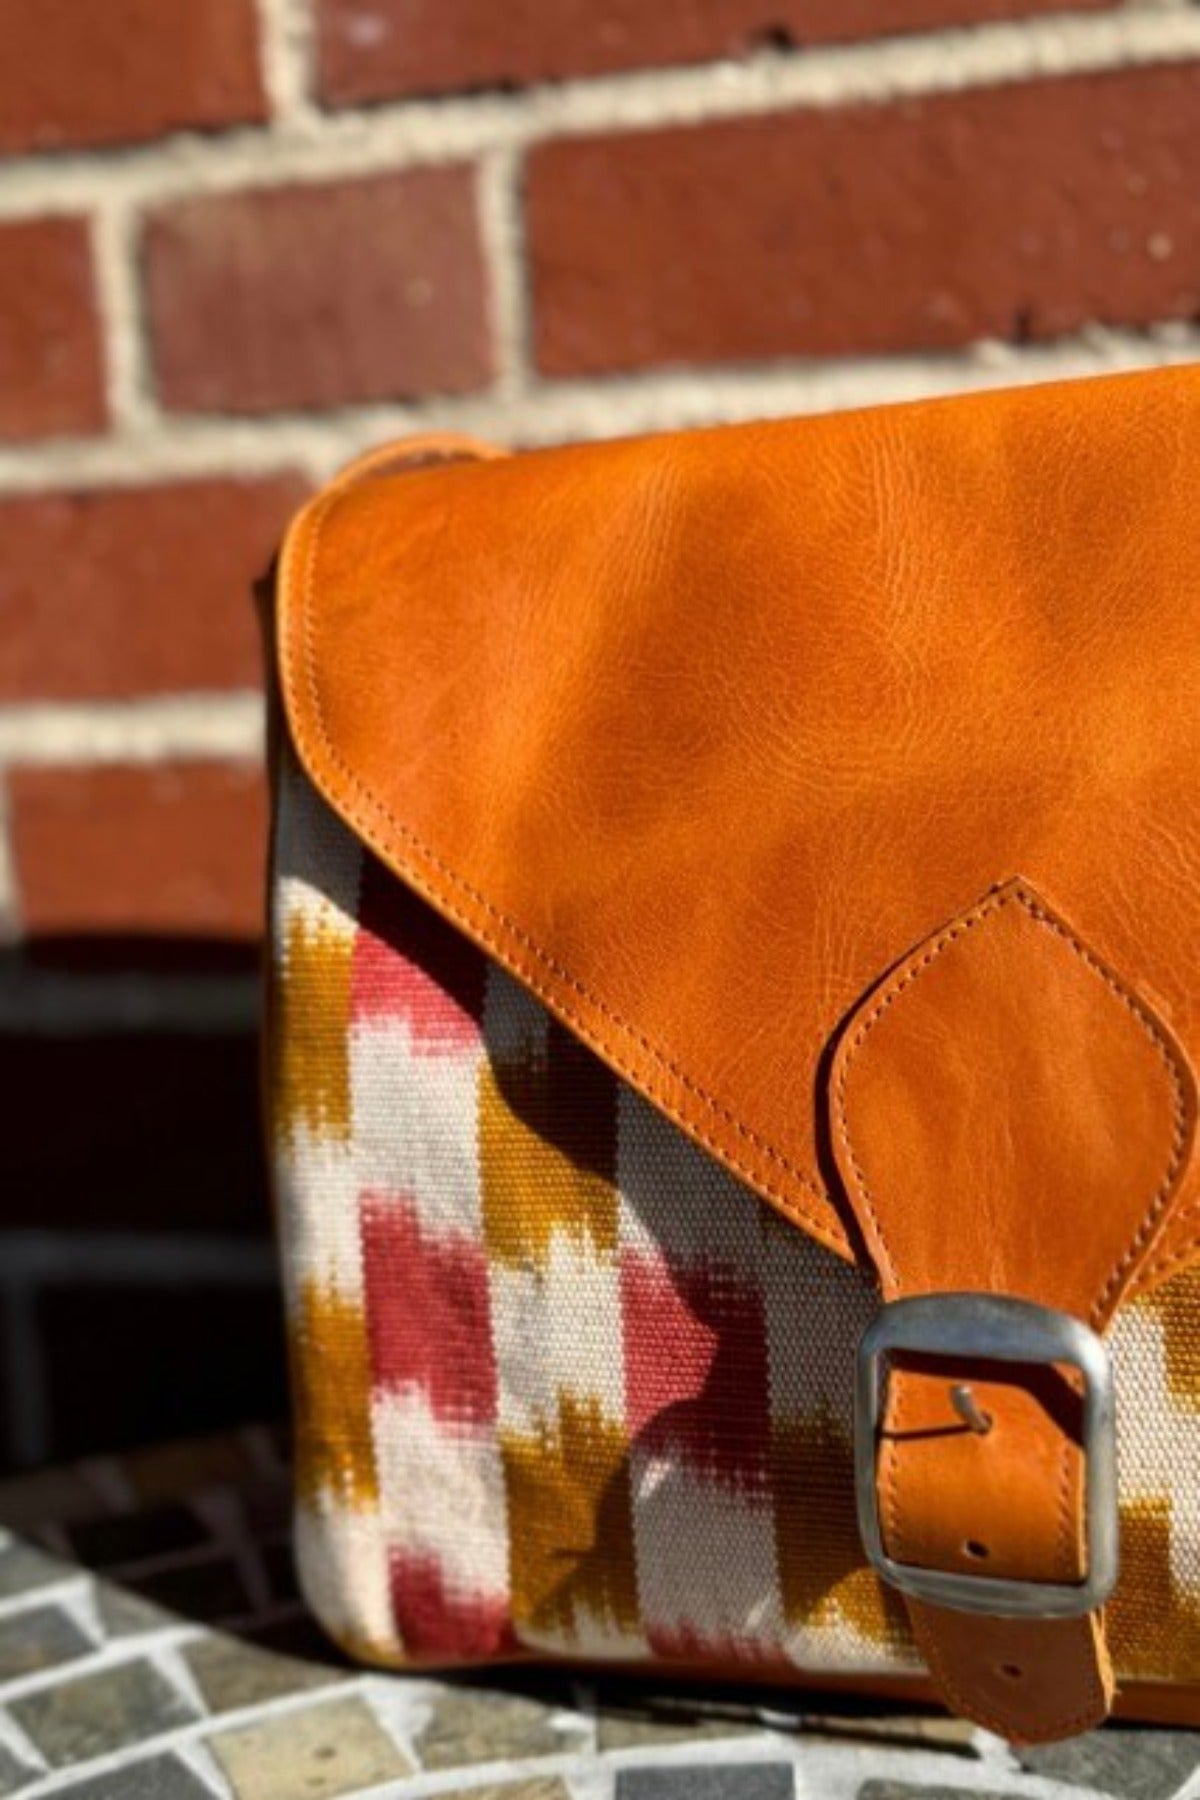 Crossbody bag with checkered rust colored design and genuine leather